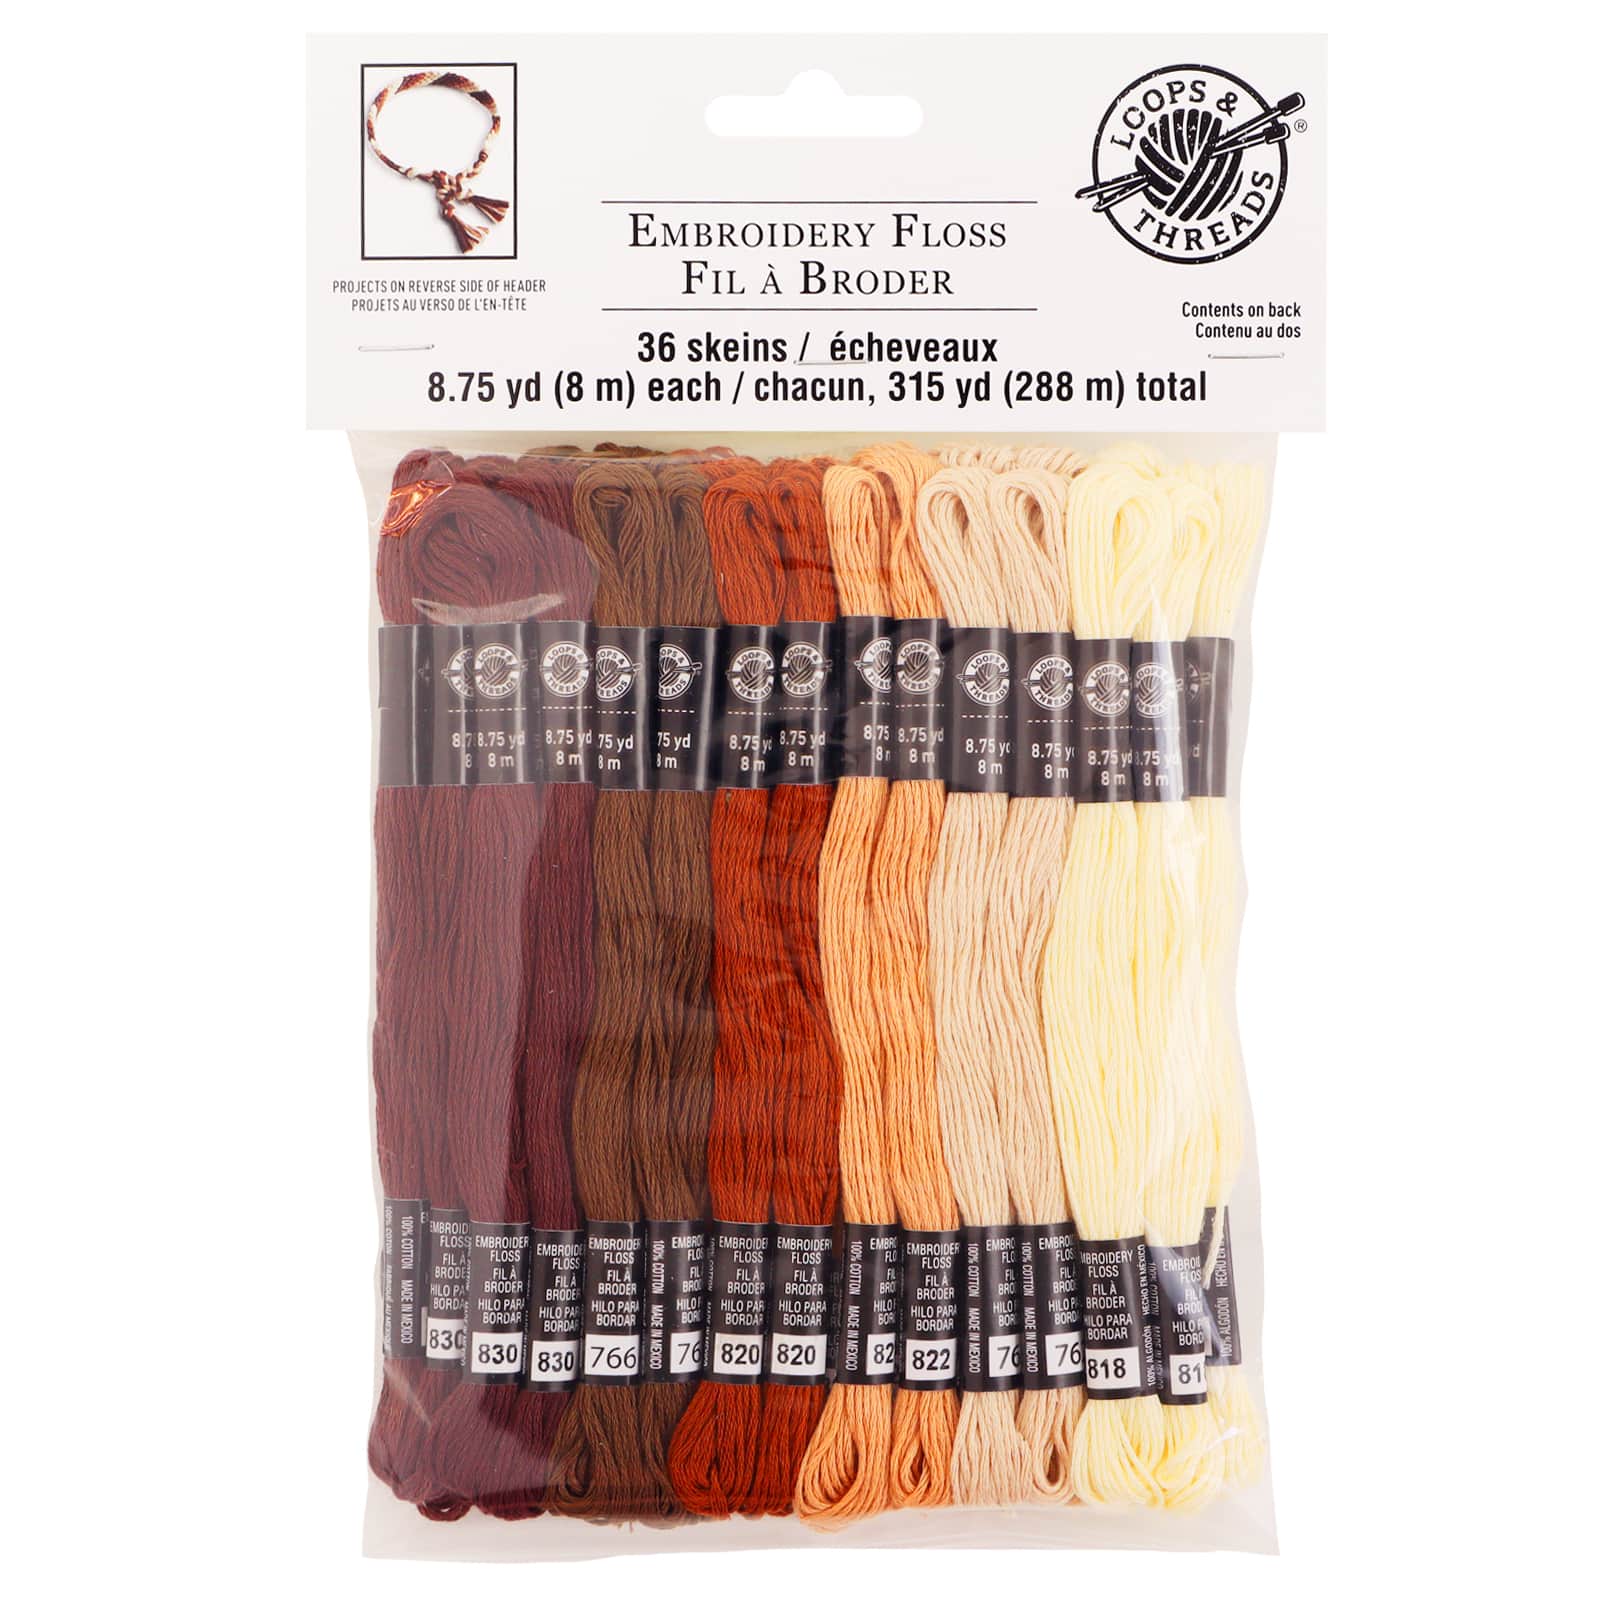 Loops & Threads Embroidery Needles, 5/10 | Michaels